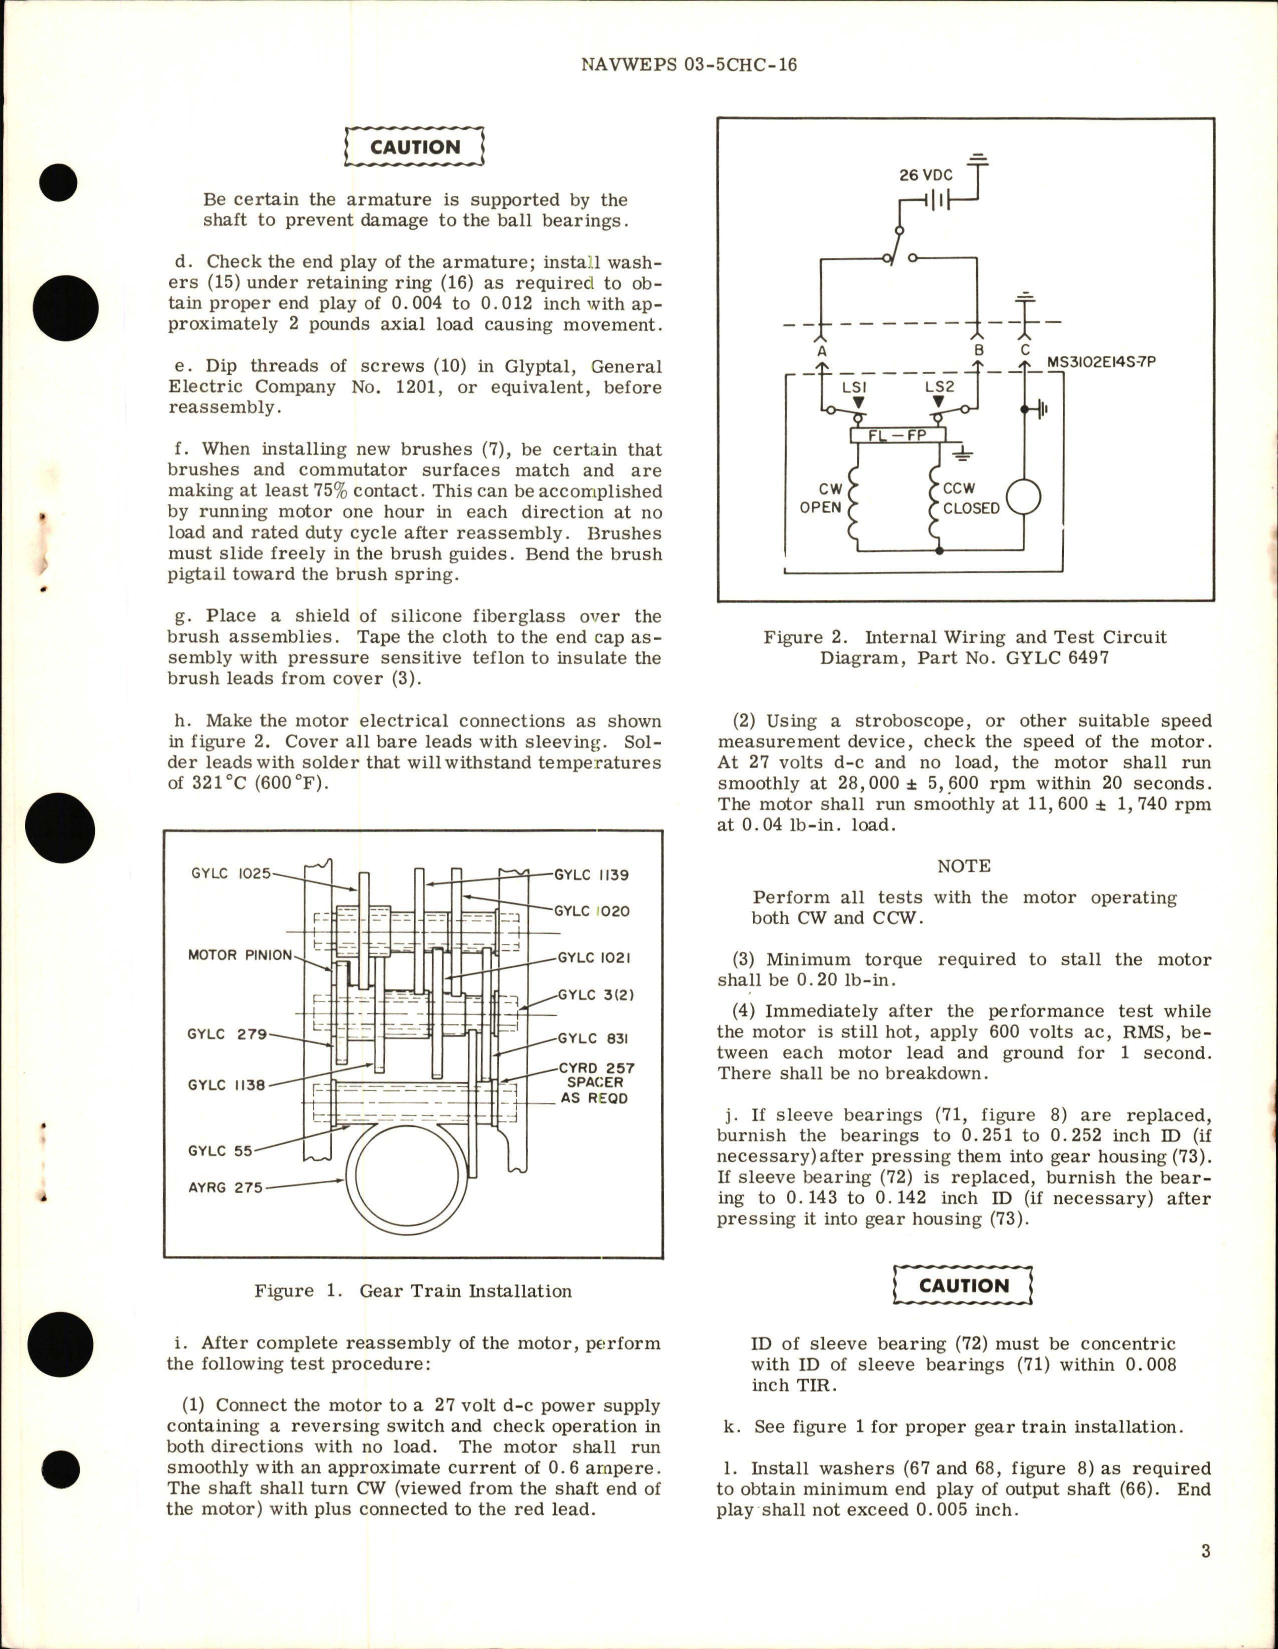 Sample page 5 from AirCorps Library document: Overhaul Instructions with Illustrated Parts Breakdown for Valve and Actuator Assembly - Part DYLZ 6263 and BYLB 7606 